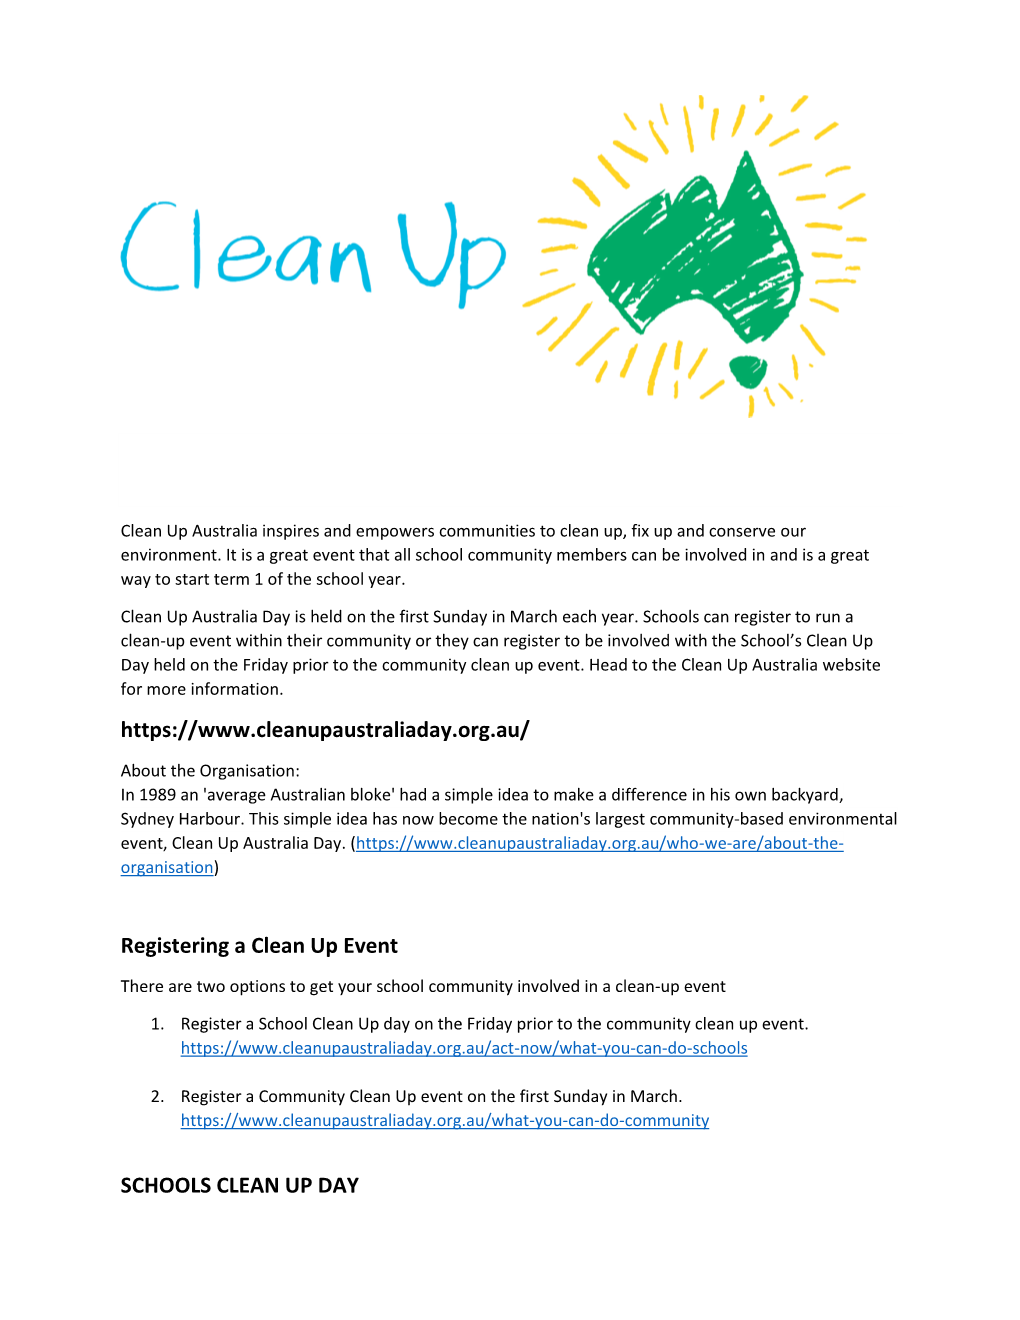 Clean up Australia Inspires and Empowers Communities to Clean Up, Fix up and Conserve Our Environment